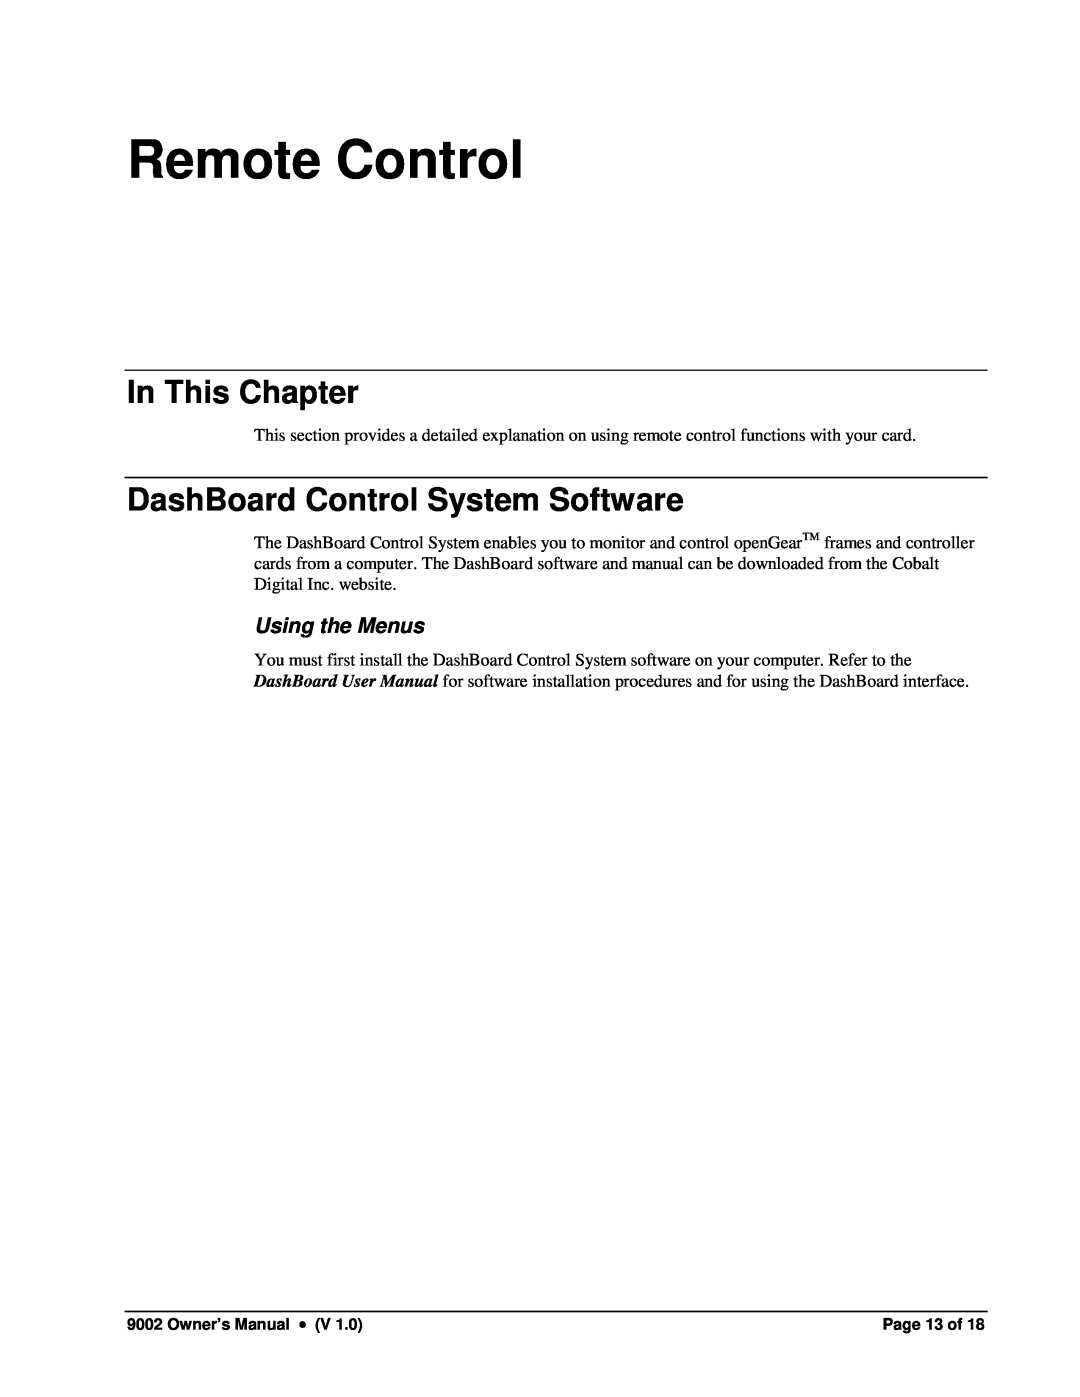 Cobalt Networks 9002 owner manual Remote Control, DashBoard Control System Software, Using the Menus, In This Chapter 